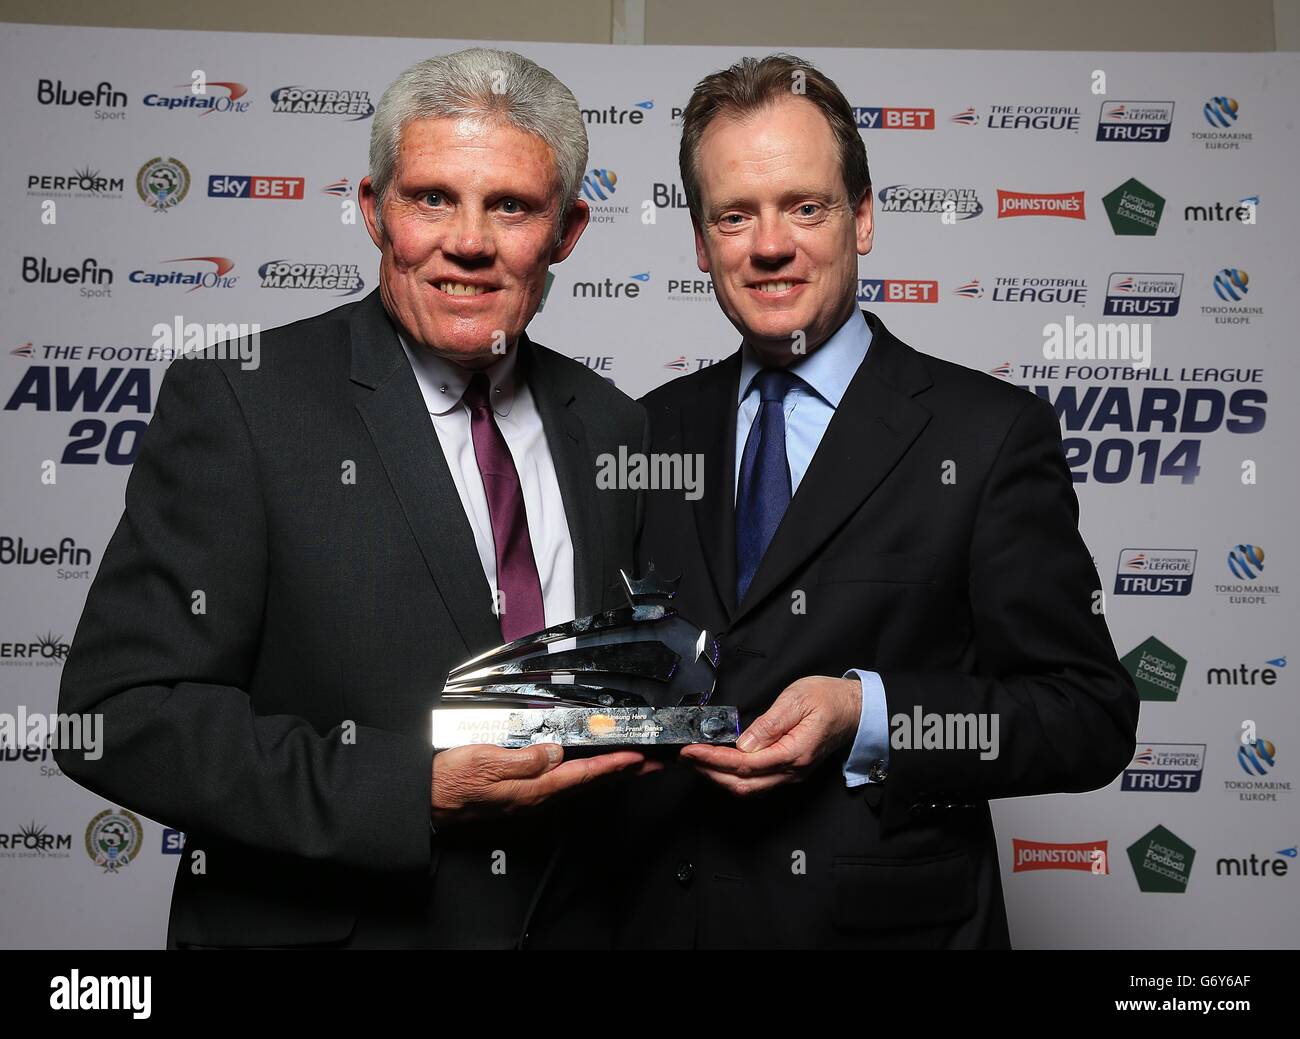 Southend United's Frank Banks (left) recieves the Tokio Marine Unsung Hero award from Tokio Marine's Executive Operations Officer Alastair Blundell at the Football League Awards 2014 Stock Photo